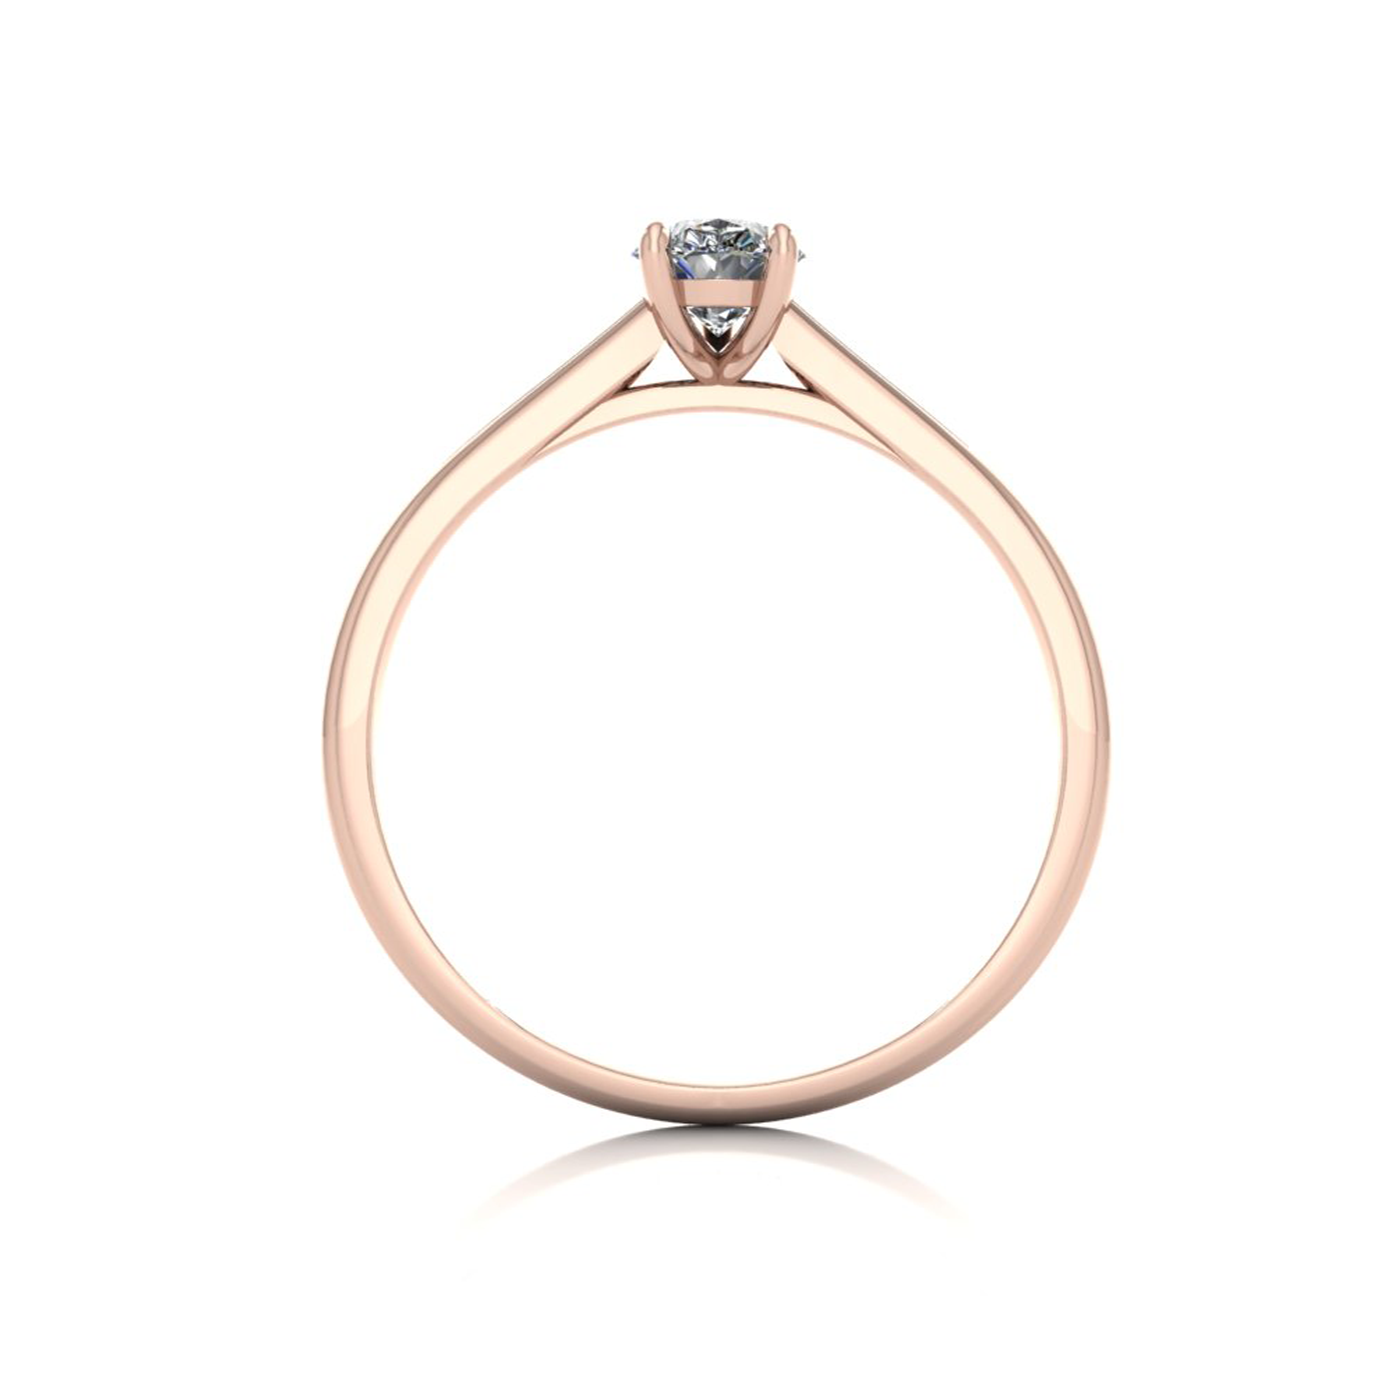 18k rose gold  0,50 ct 3 prongs solitaire pear cut diamond engagement ring with whisper thin band